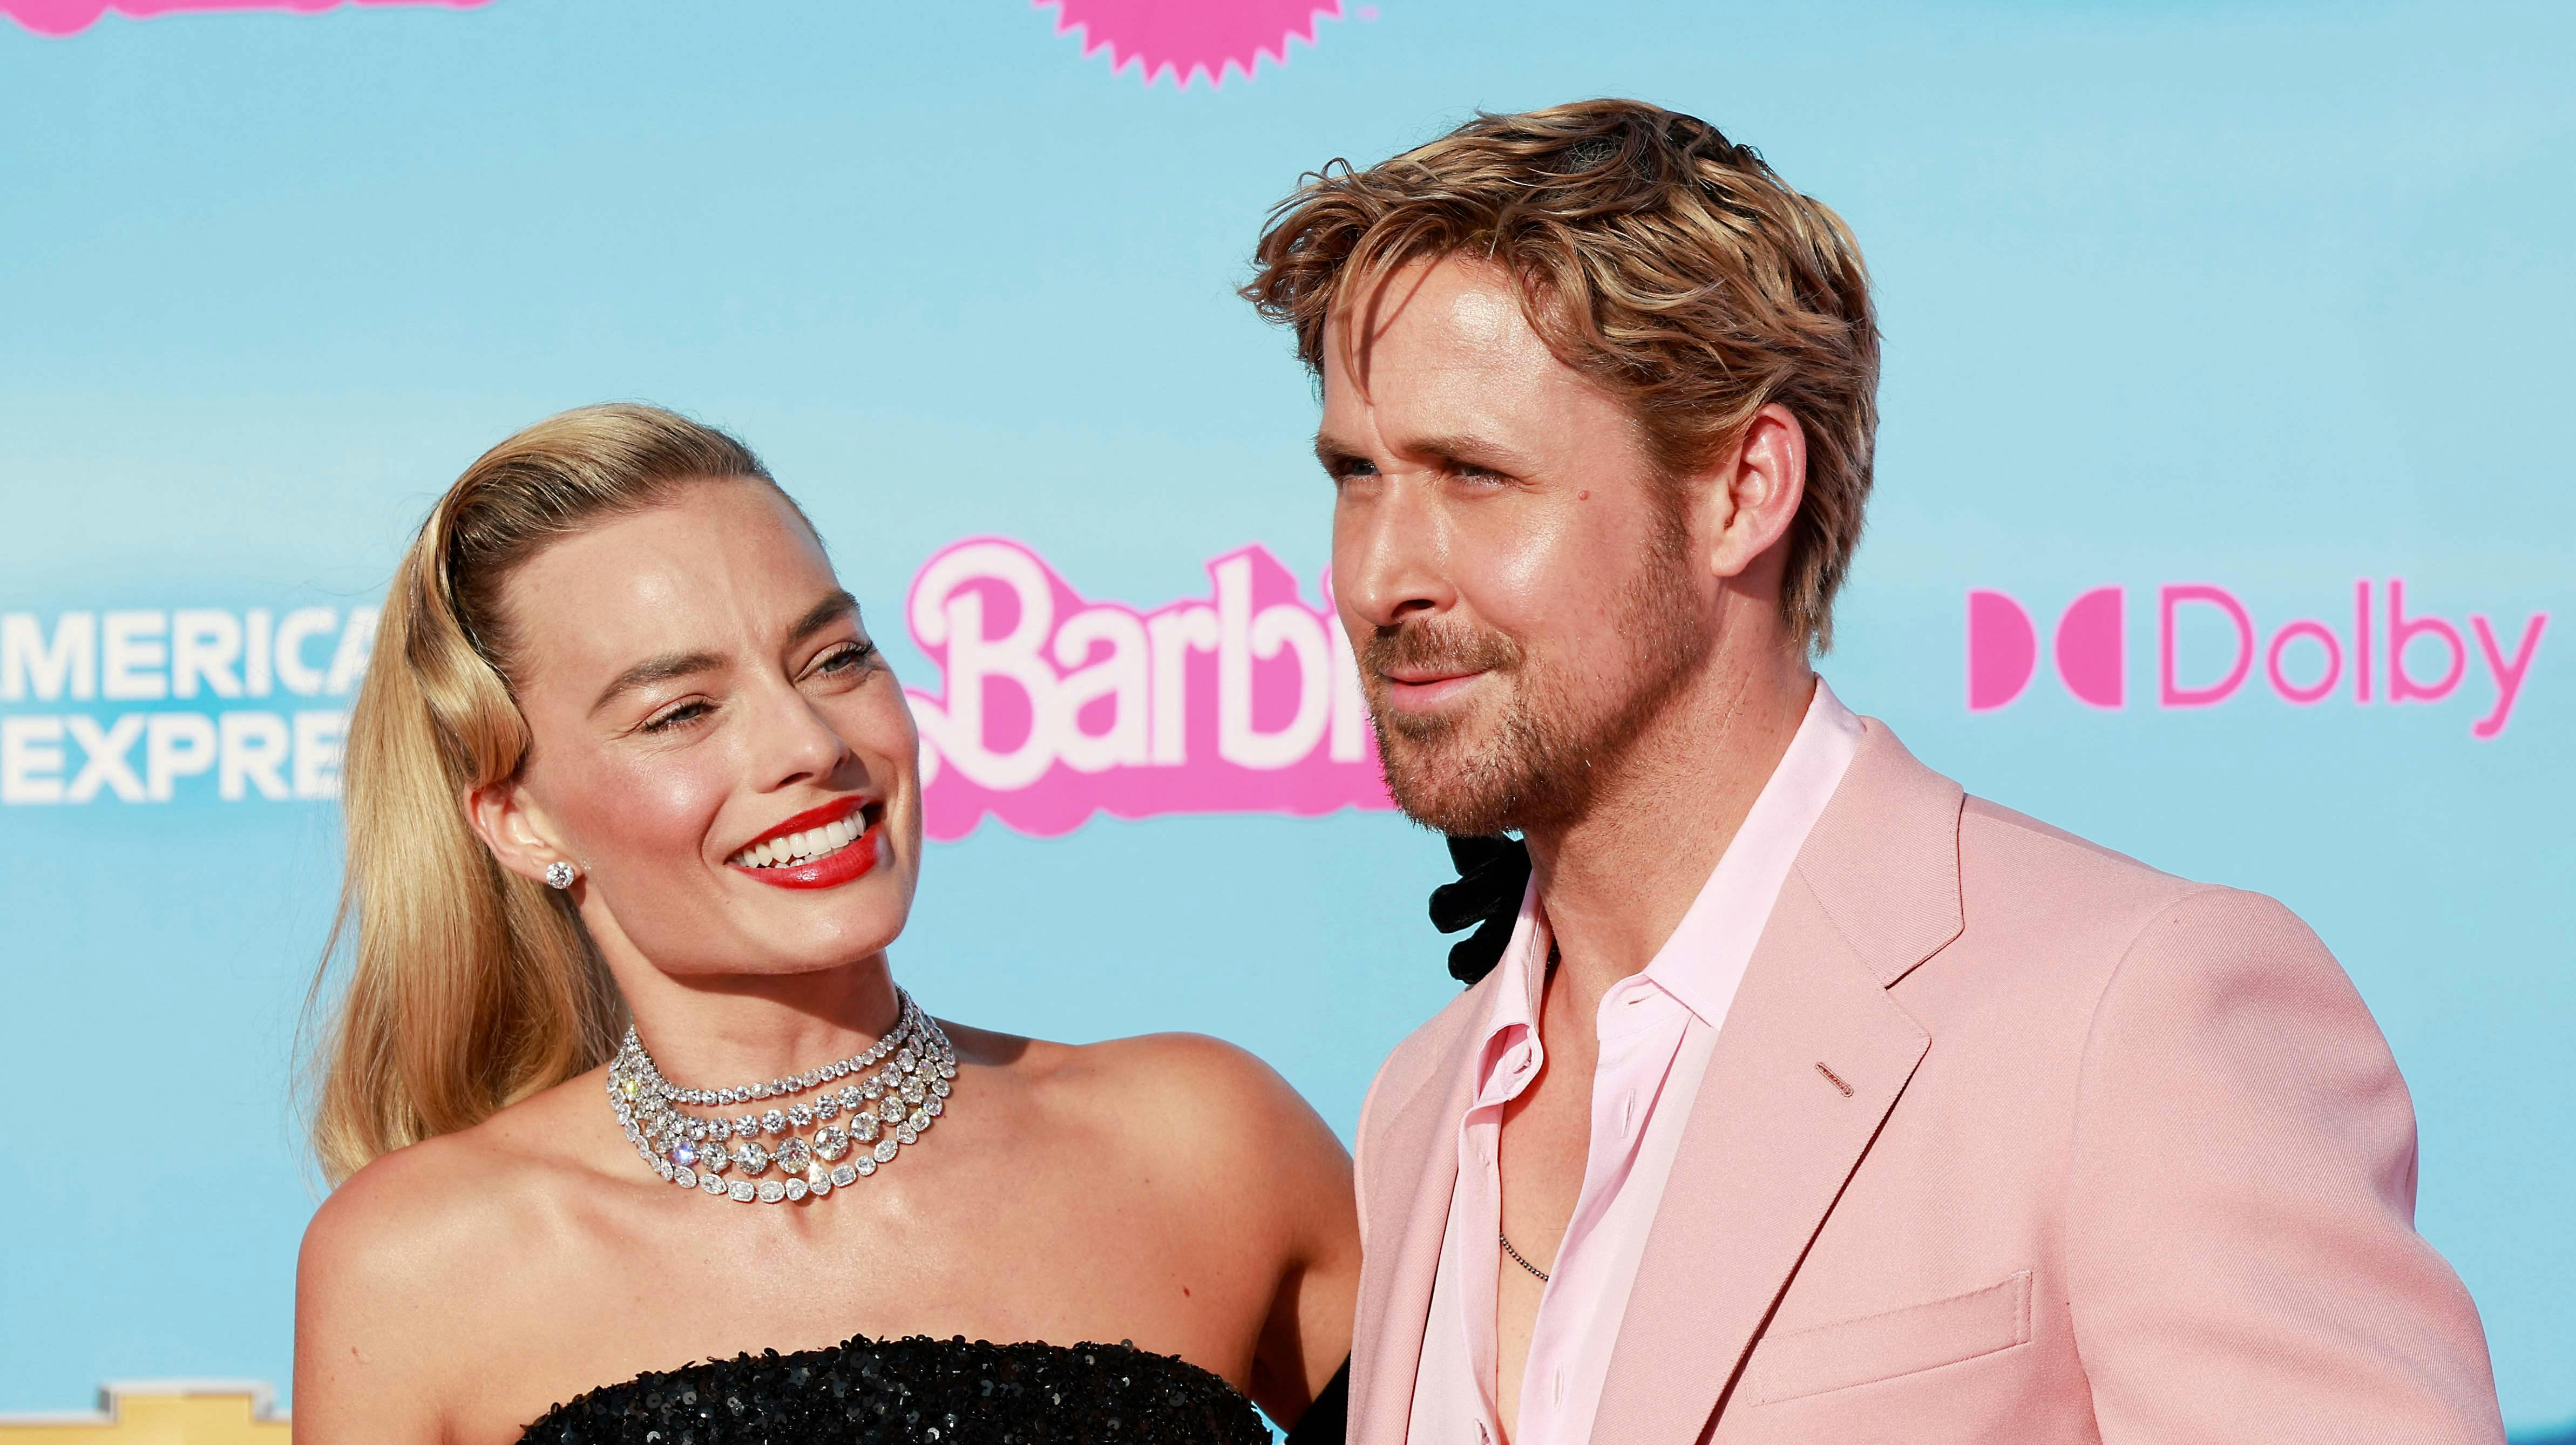 Australian actress Margot Robbie and Canadian-US actor Ryan Reynolds arrive for the world premiere of "Barbie" at the Shrine Auditorium in Los Angeles, on July 9, 2023. (Photo by Michael Tran / AFP)